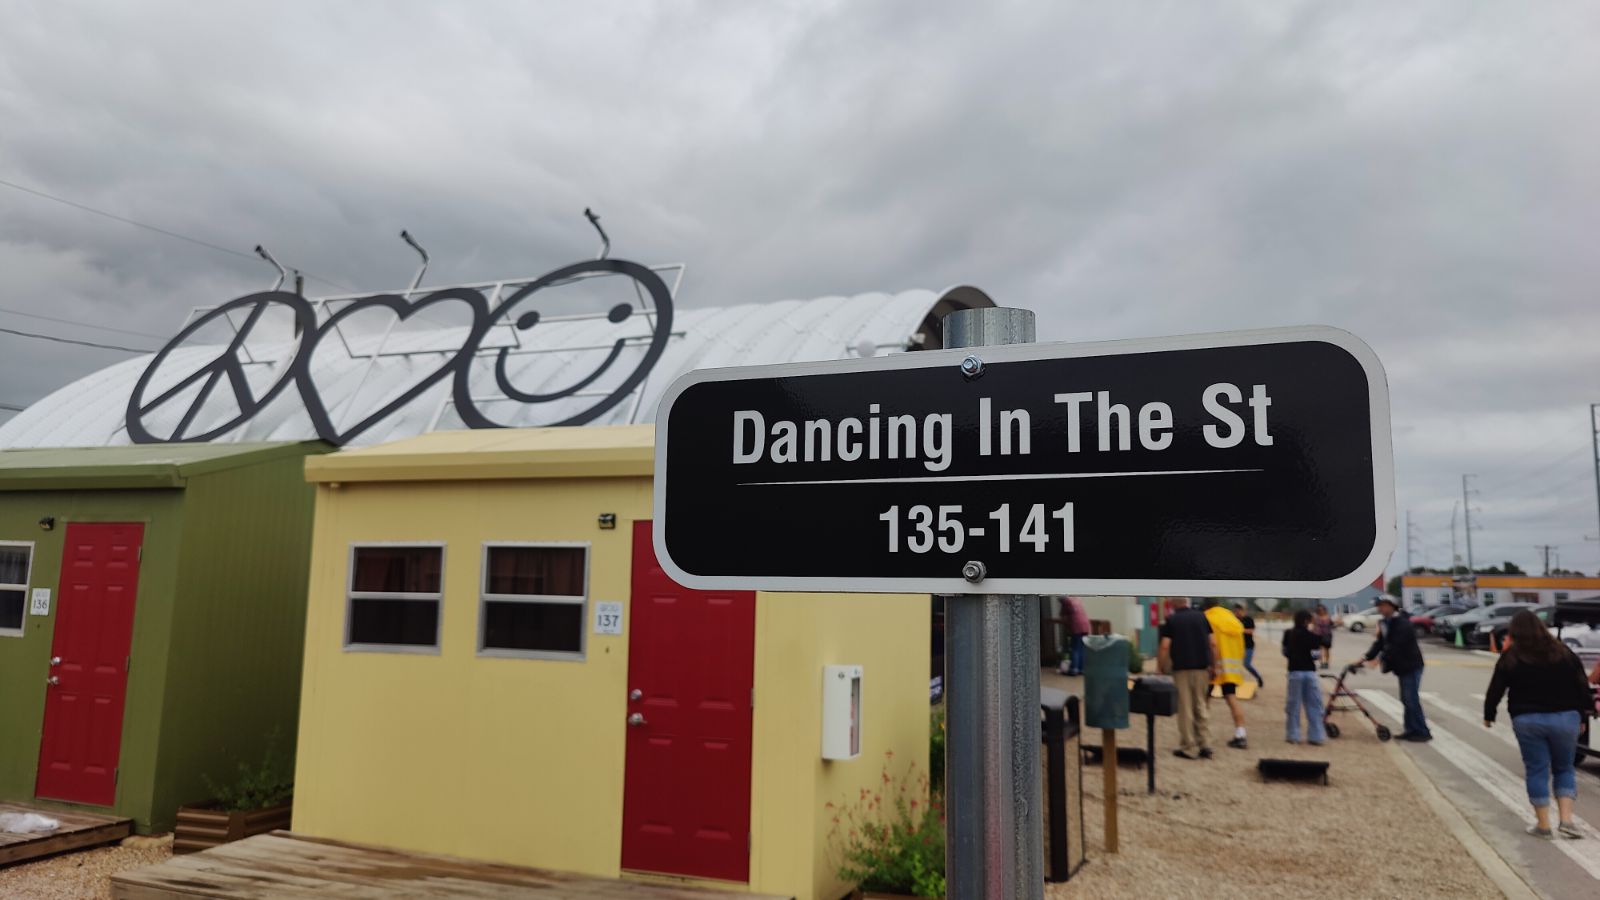 Street sign that says "Dancing in the St" with a tiny home in the background and peace, love, and happiness symbols